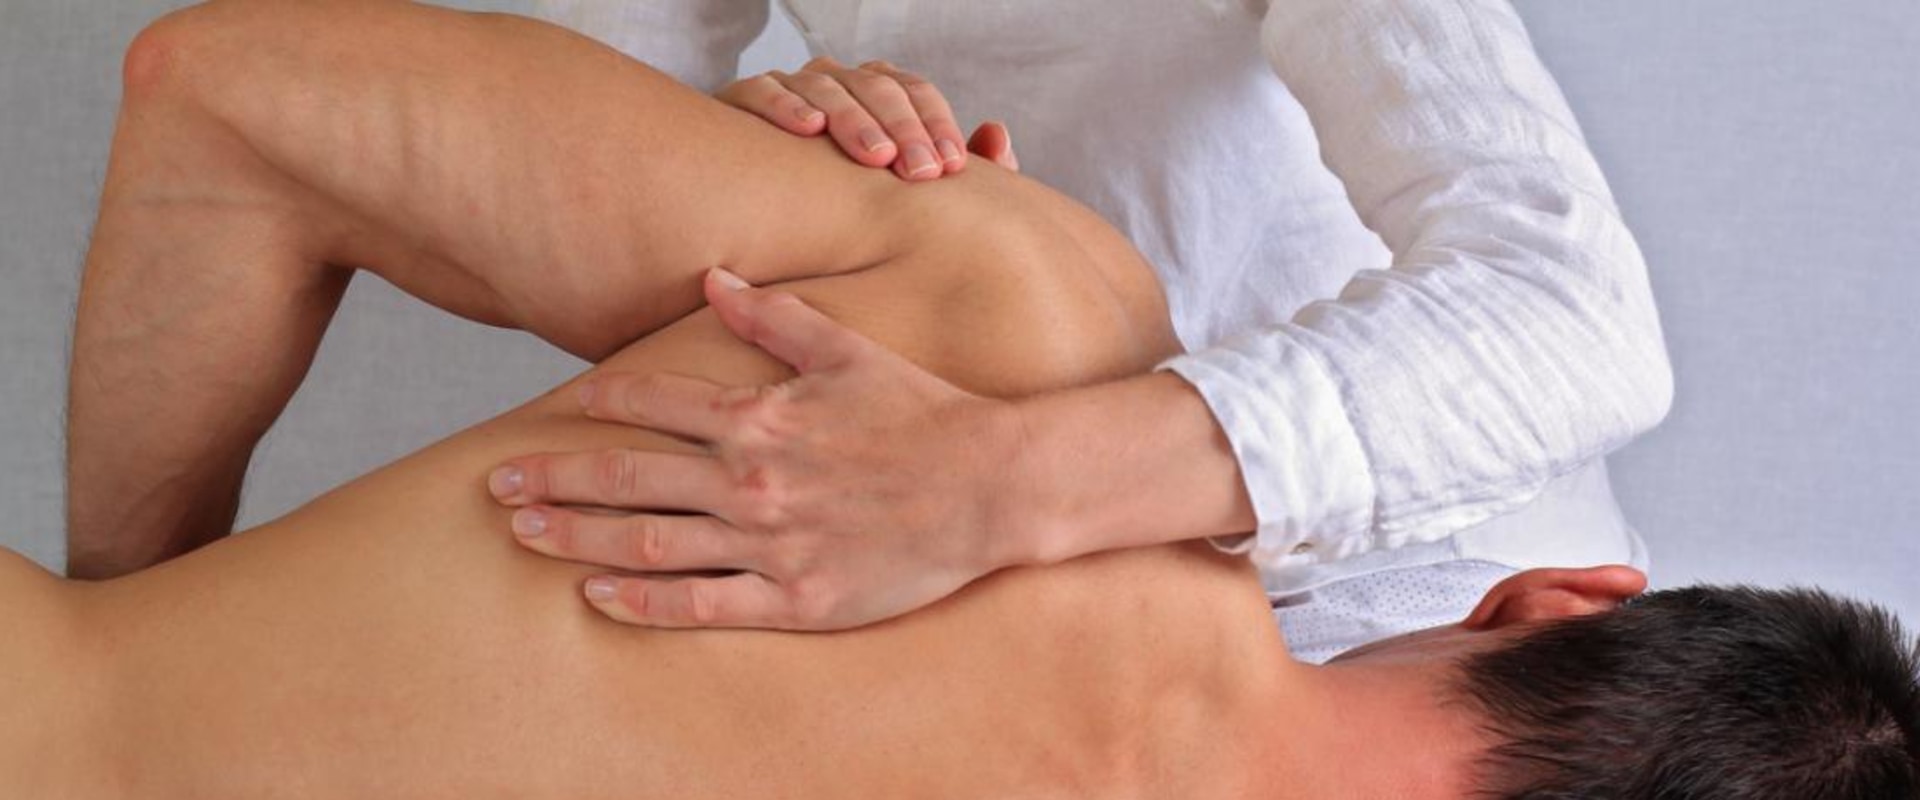 What are the side effects of osteopathy?